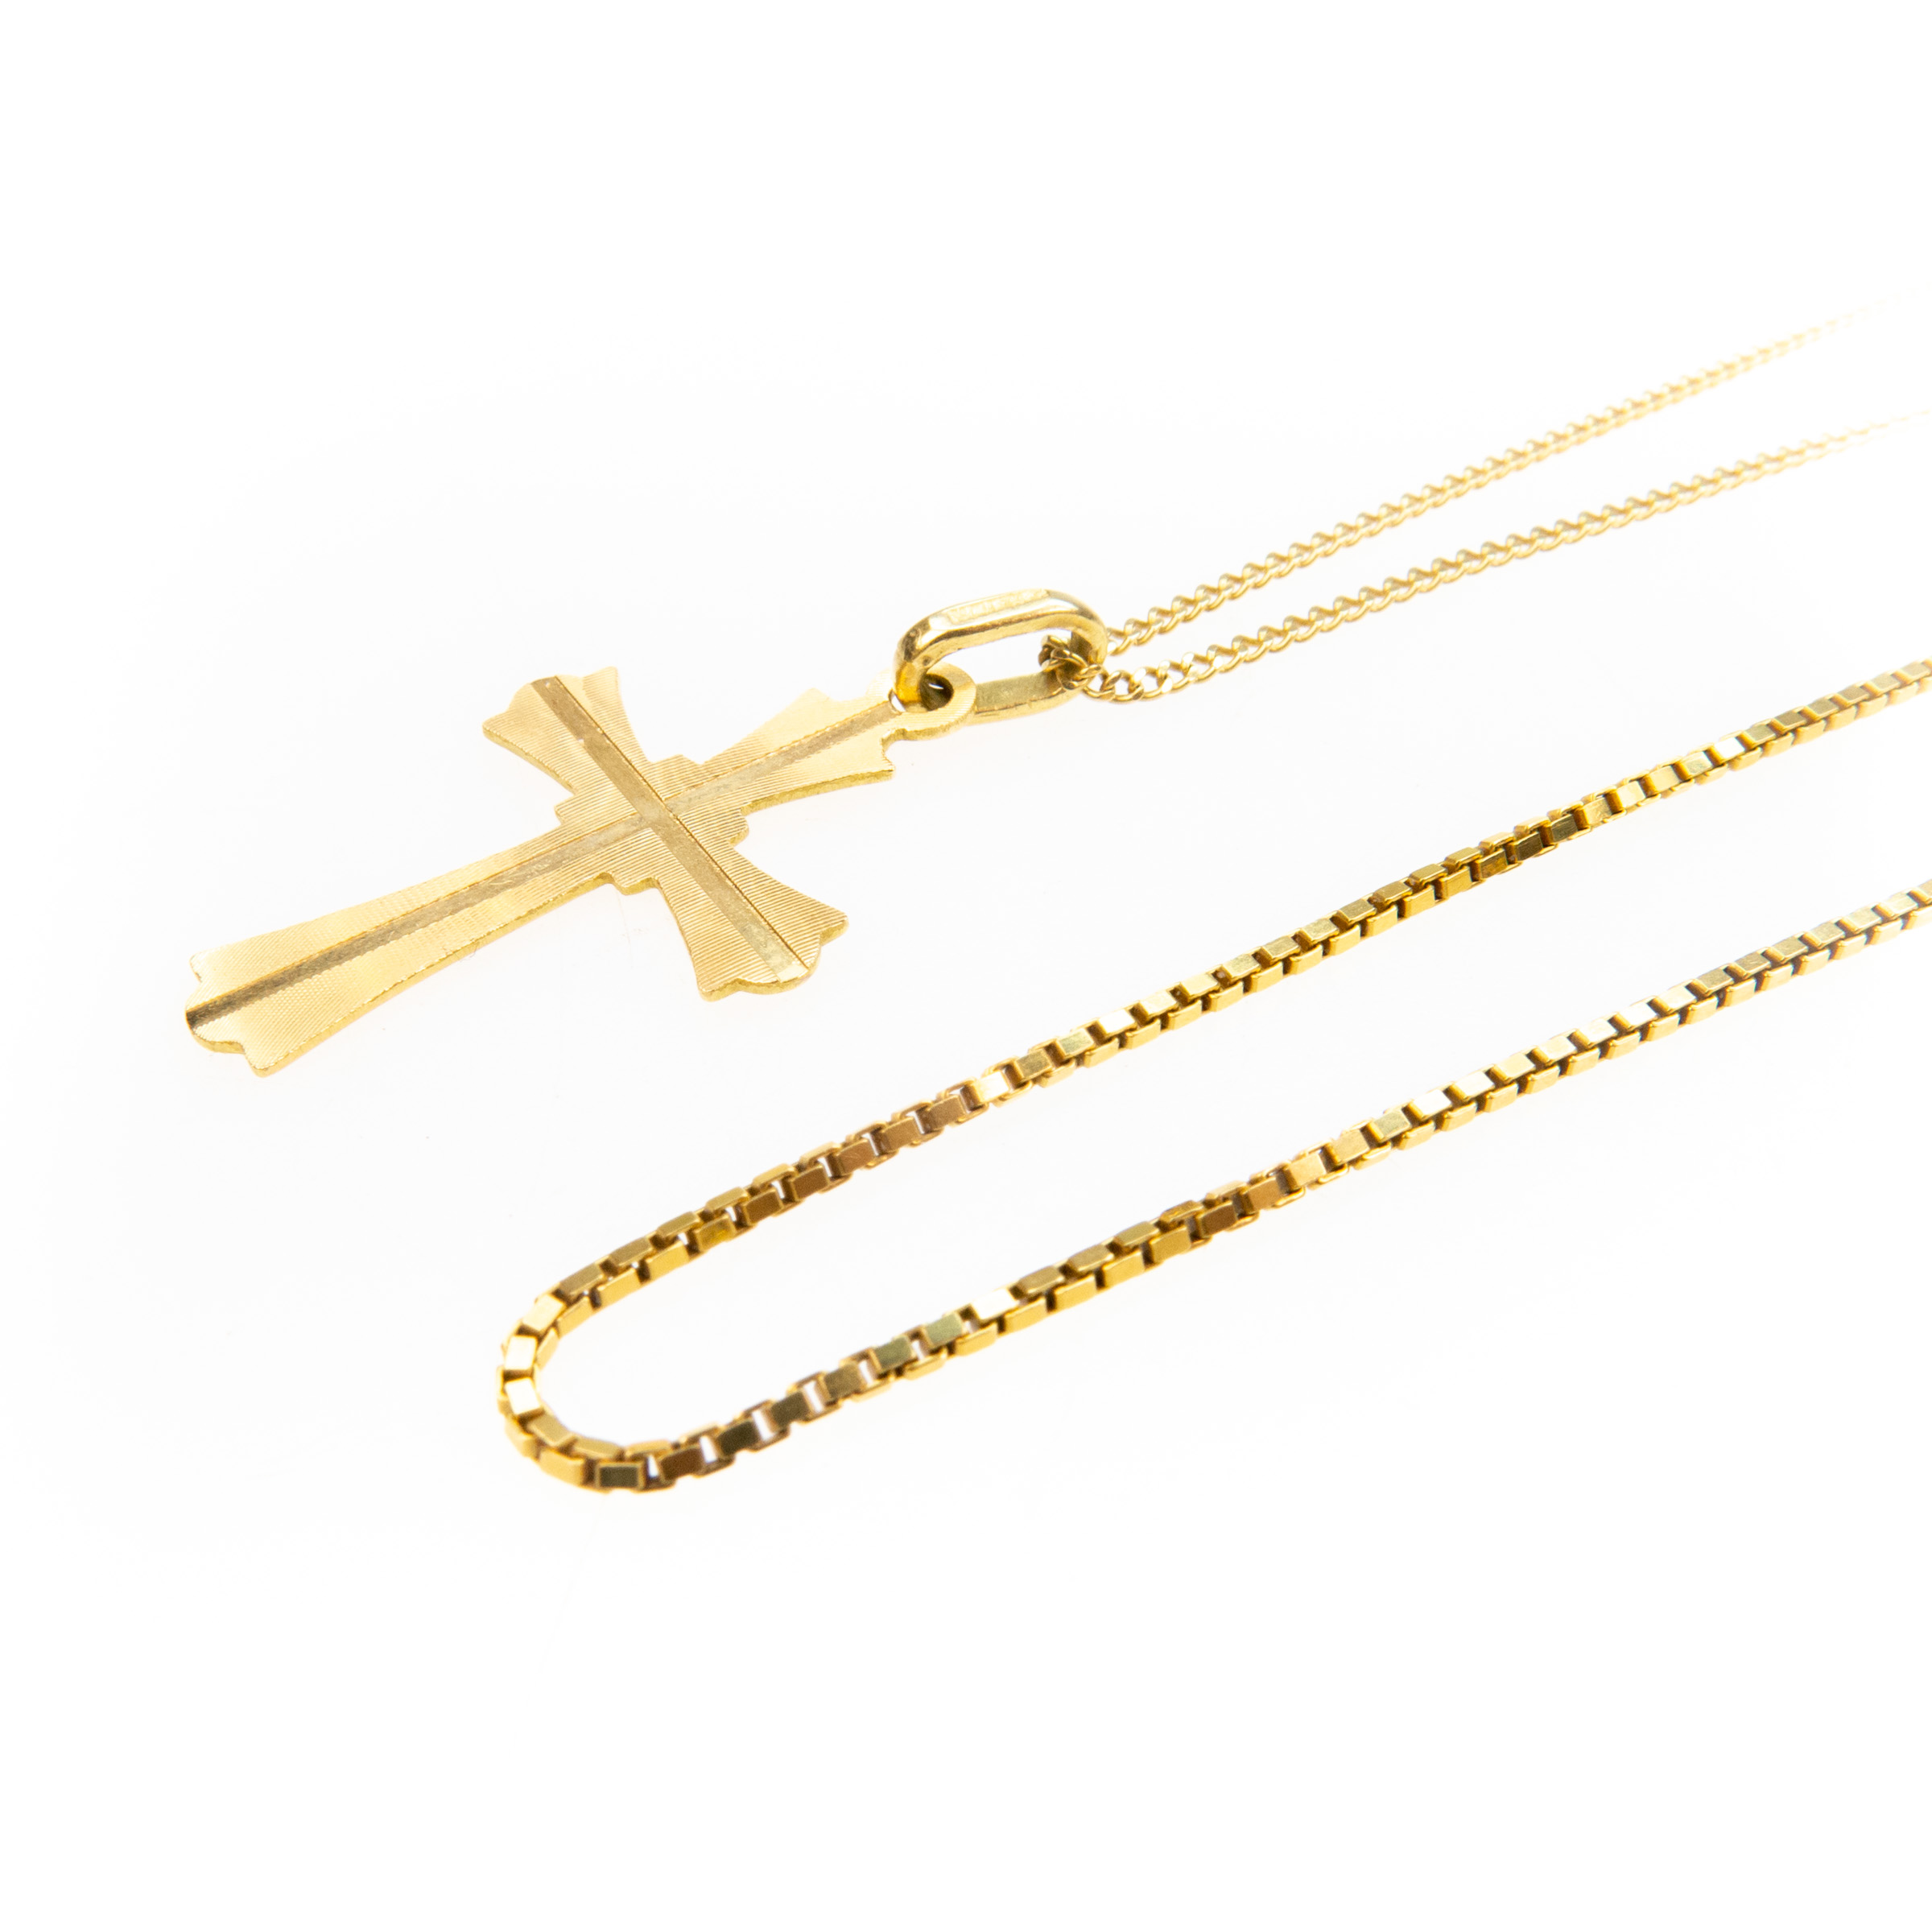 2 X 18K Yellow Gold Chains